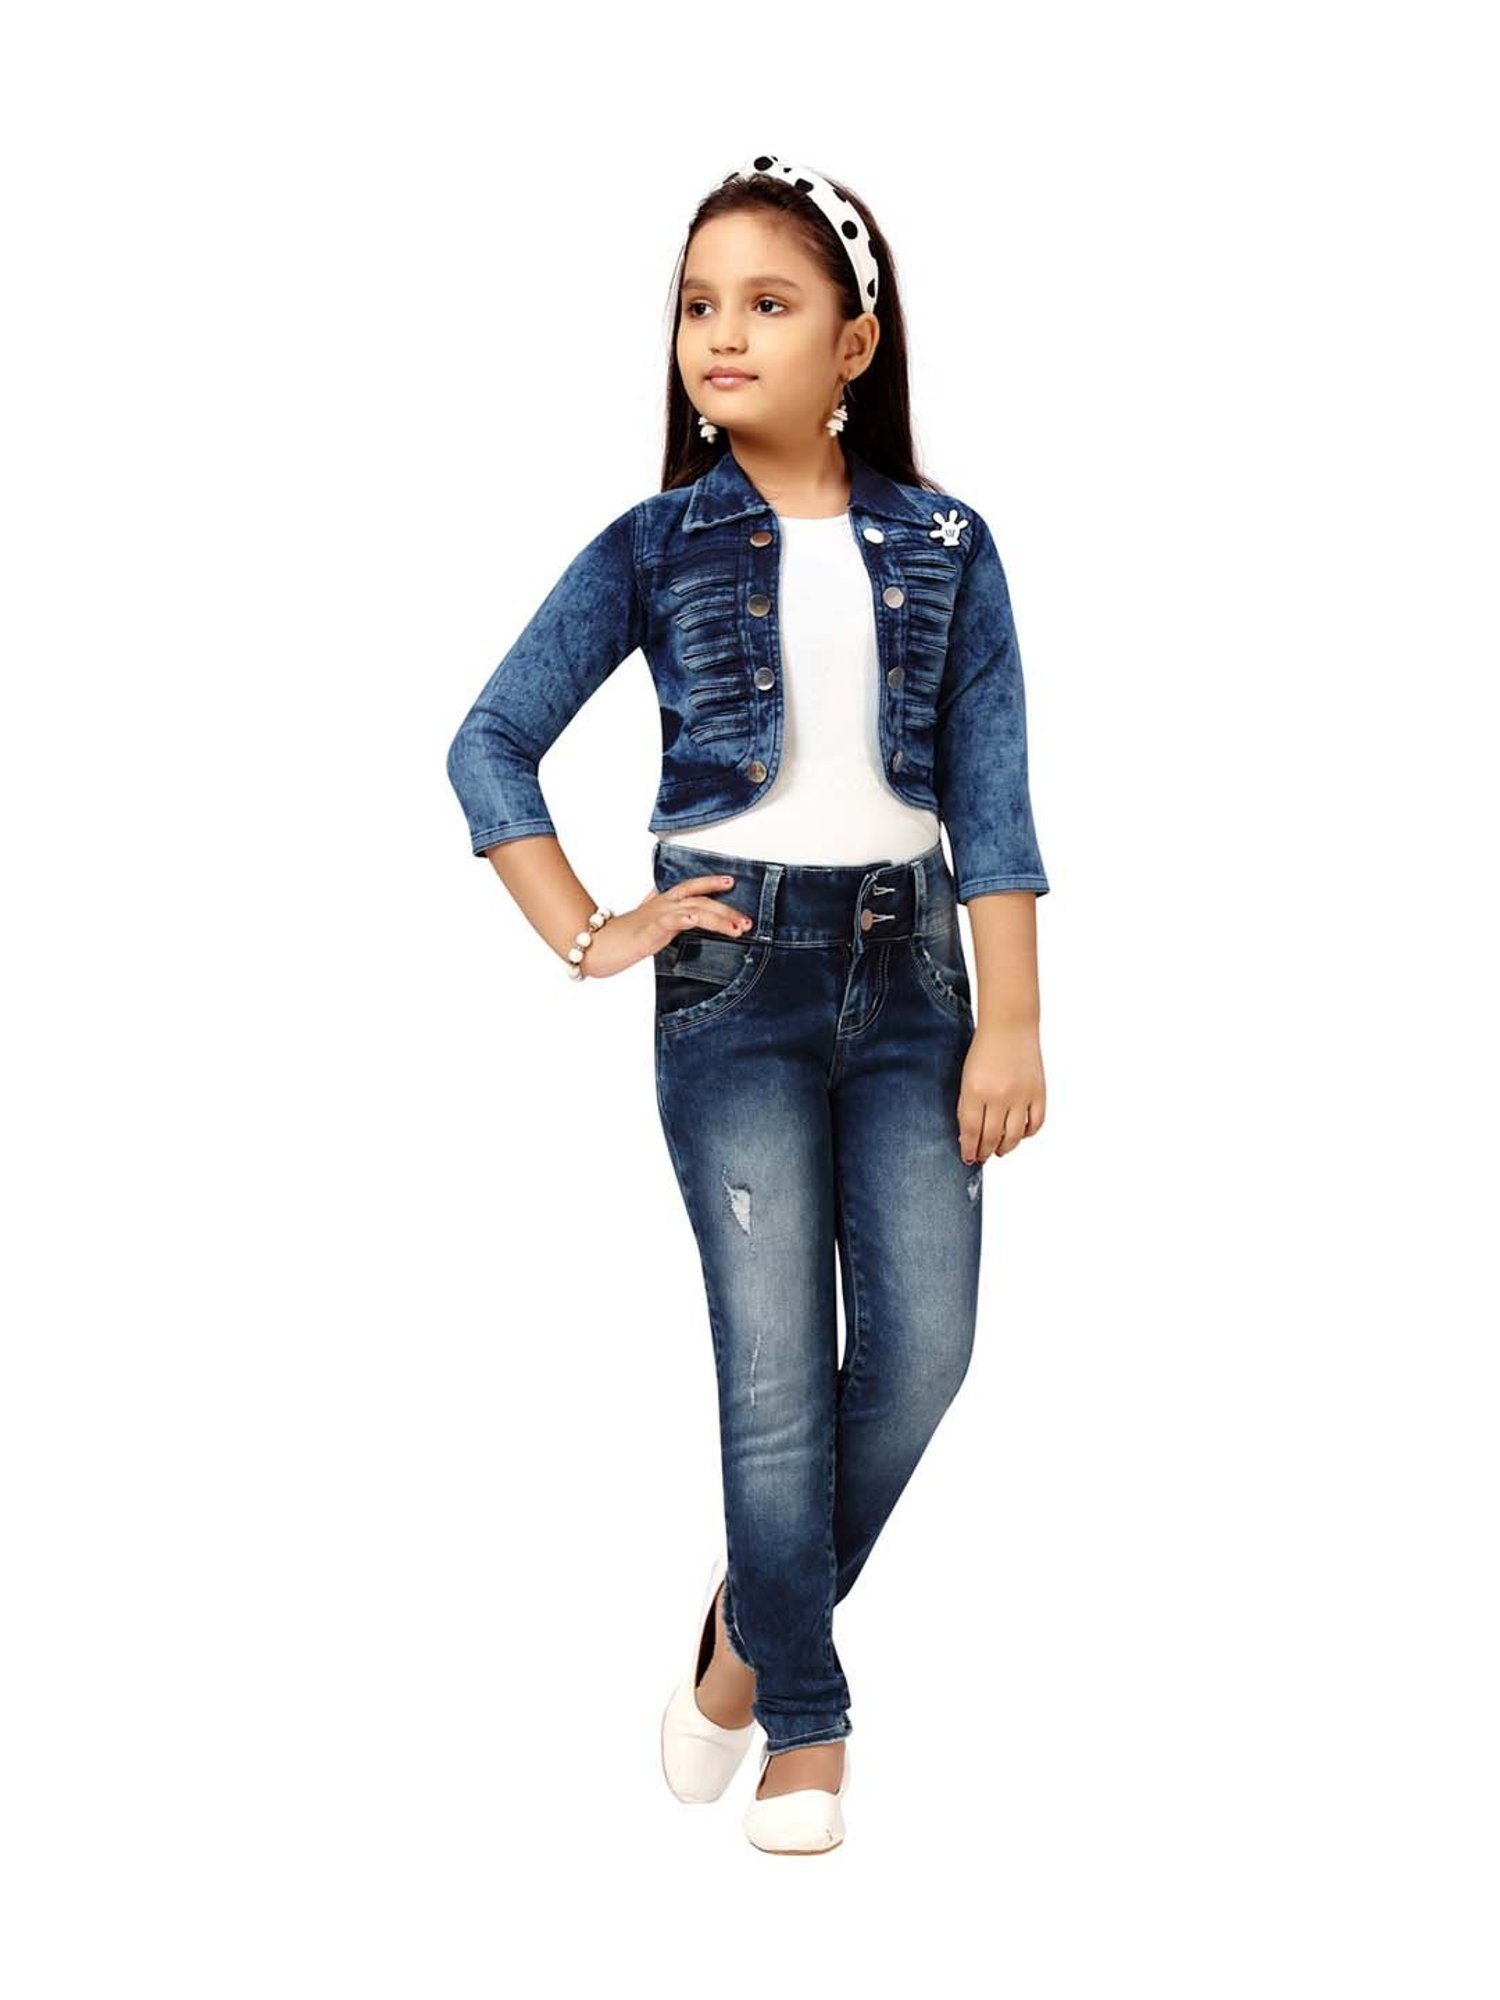 Ask the Strategist: I Want an Oversize Jean Jacket Like the Cool Girls |  Oversized jean jacket, Oversized jeans, Womens fashion casual jeans